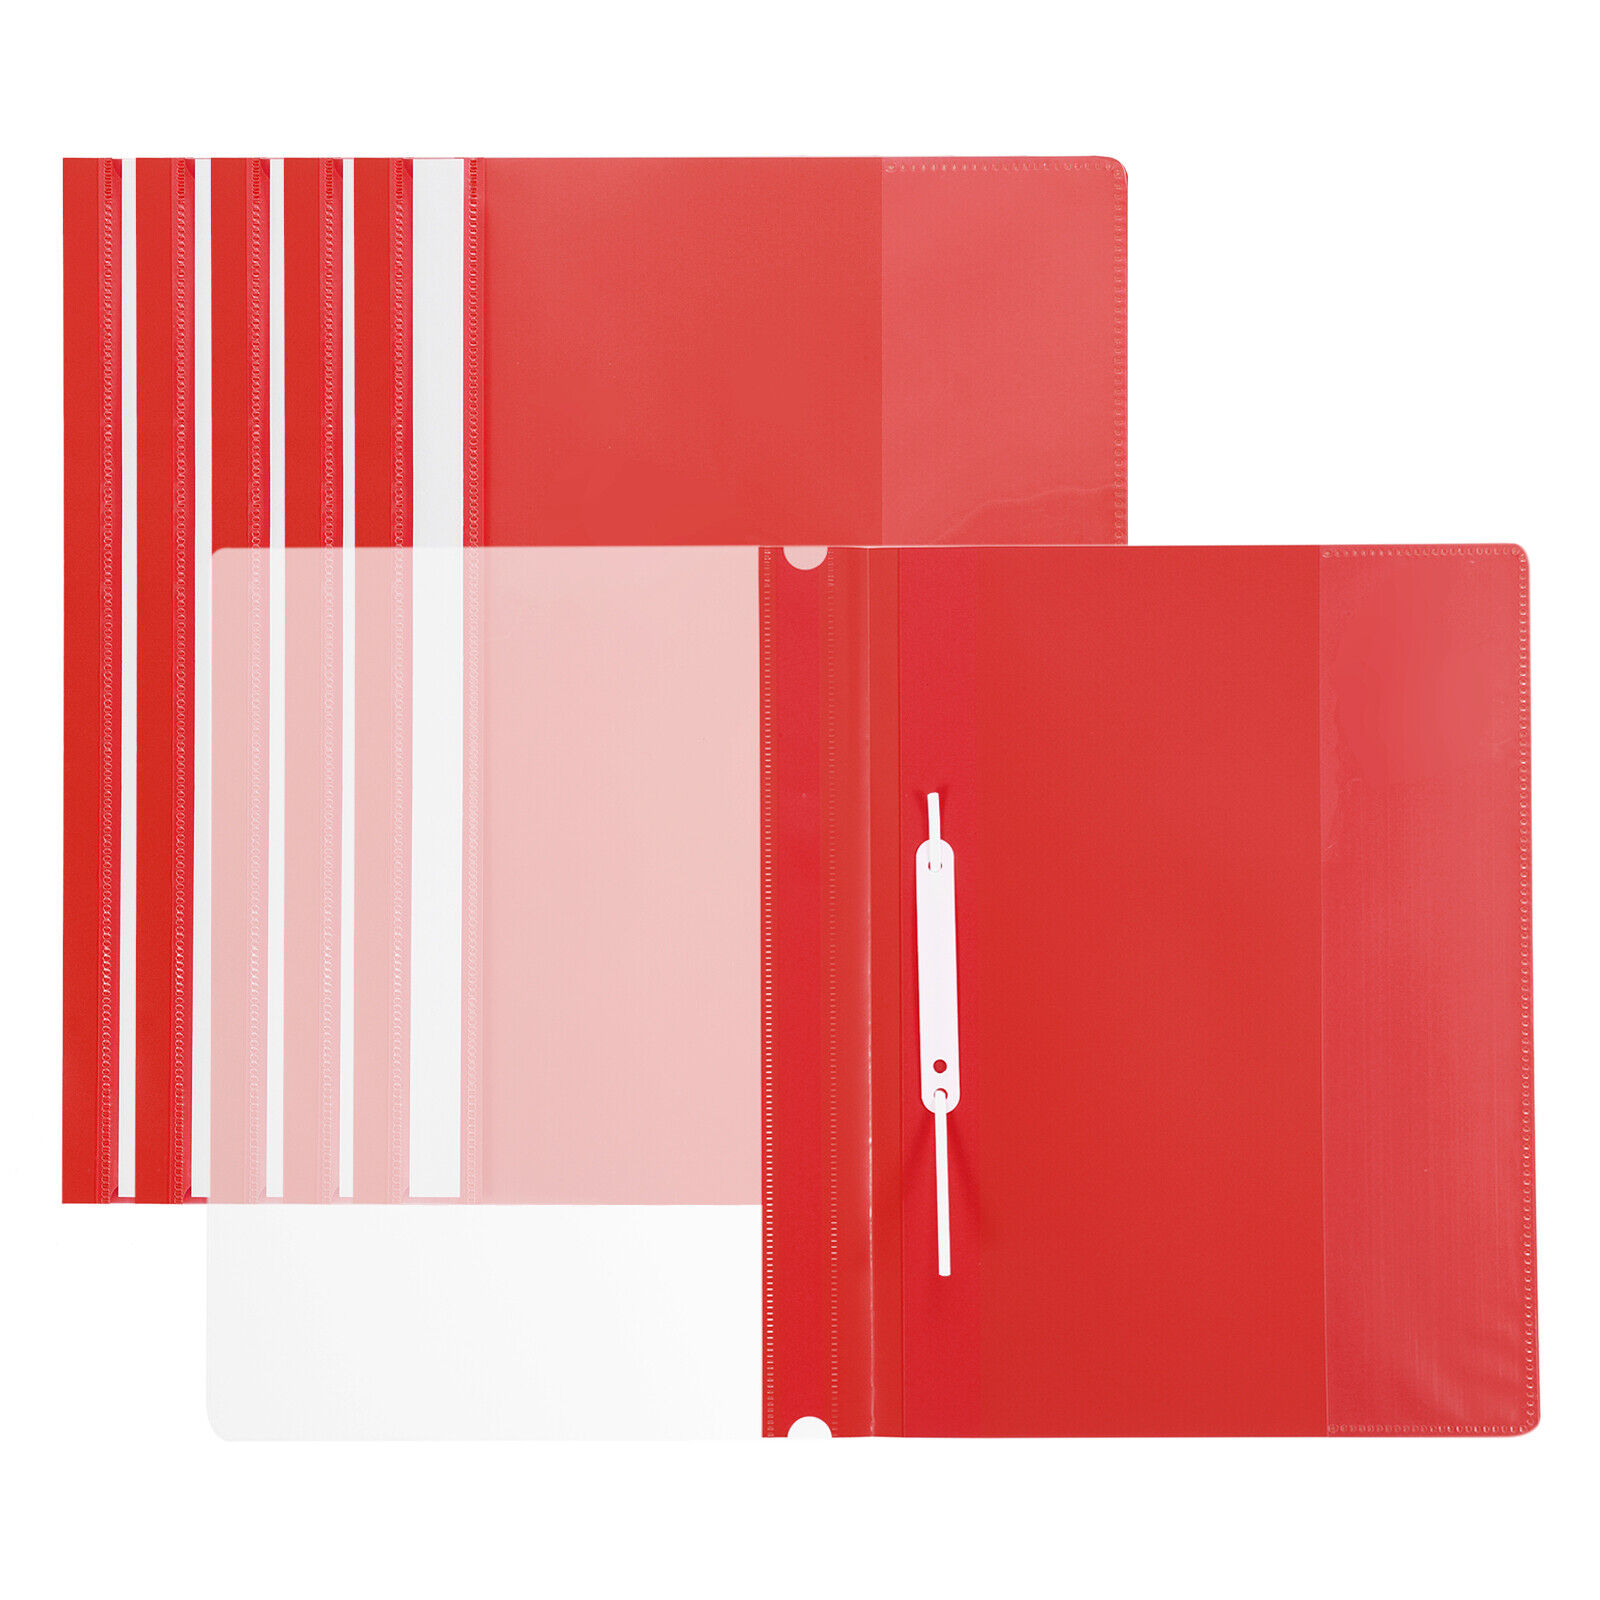 Report Covers, 6 Pcs Plastic Clear Front File Binder Folder Protector, Red